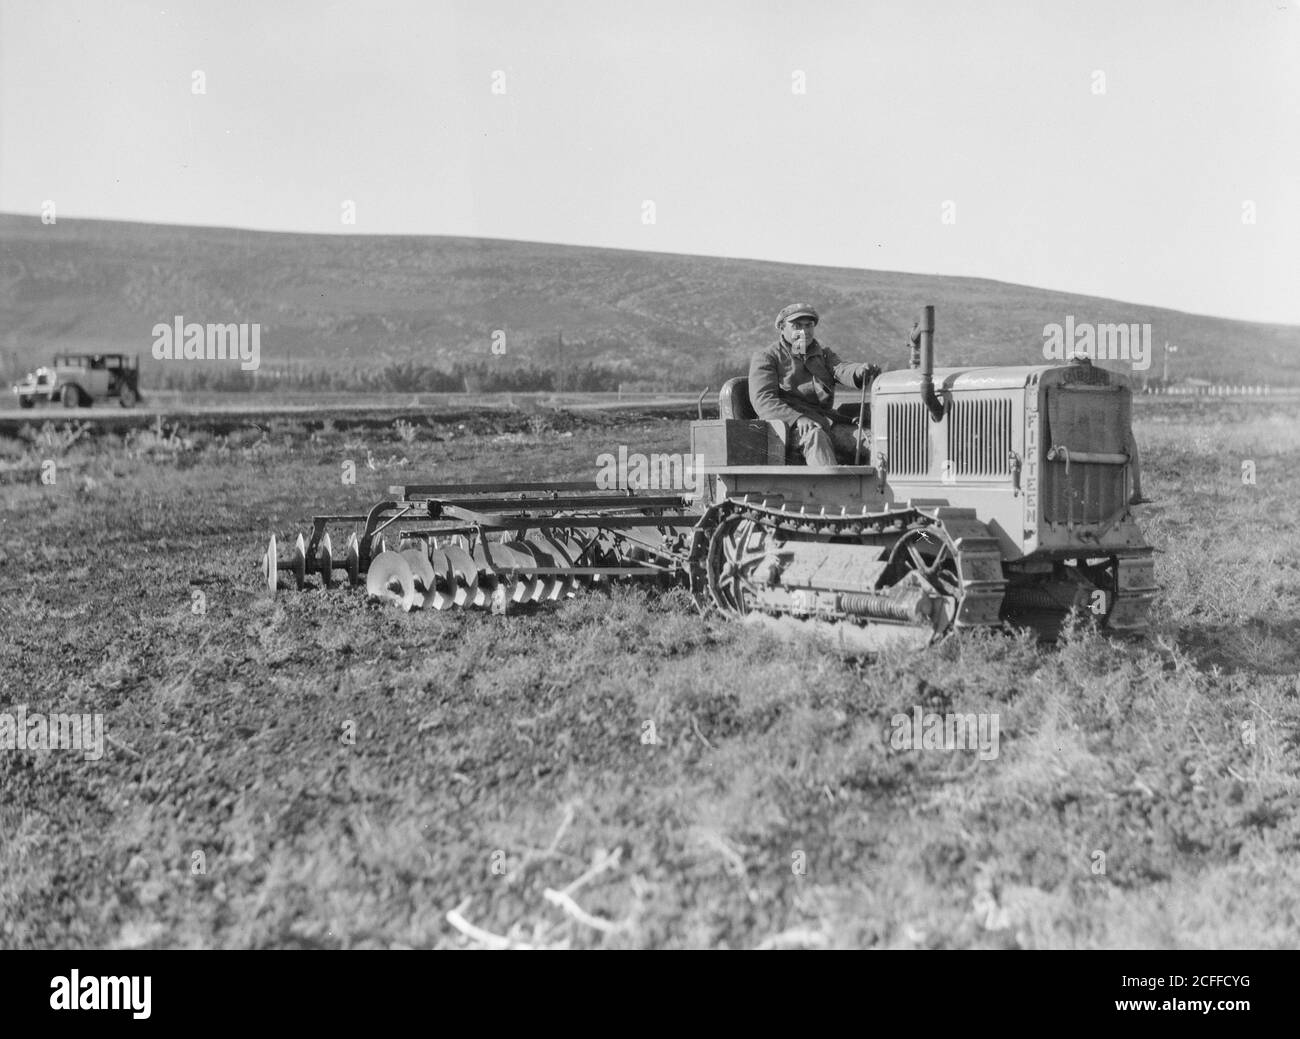 'Middle East History - The Keren Hayesod. Agricultural Colonies on Plain of Esdraelon ''The Emek.'' Tractor disc plowing on the great stretches of Esdraelon' Stock Photo